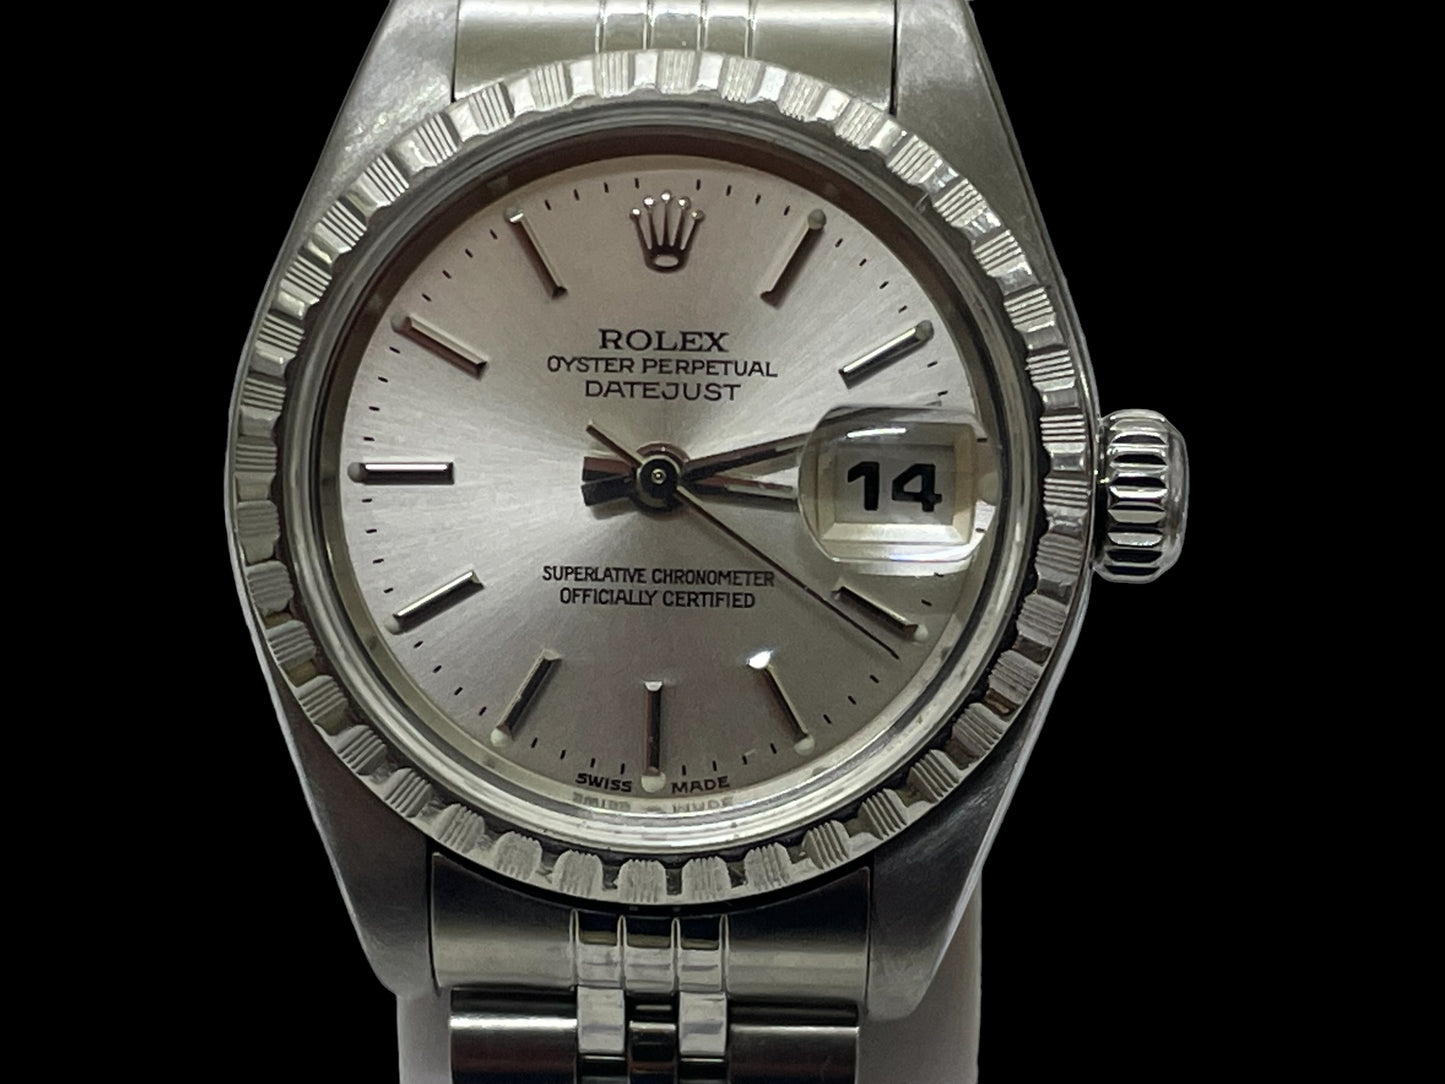 Stainless Steel Rolex Ladies Datejust 26mm 79240 Women's Watch (Local pick-up only)